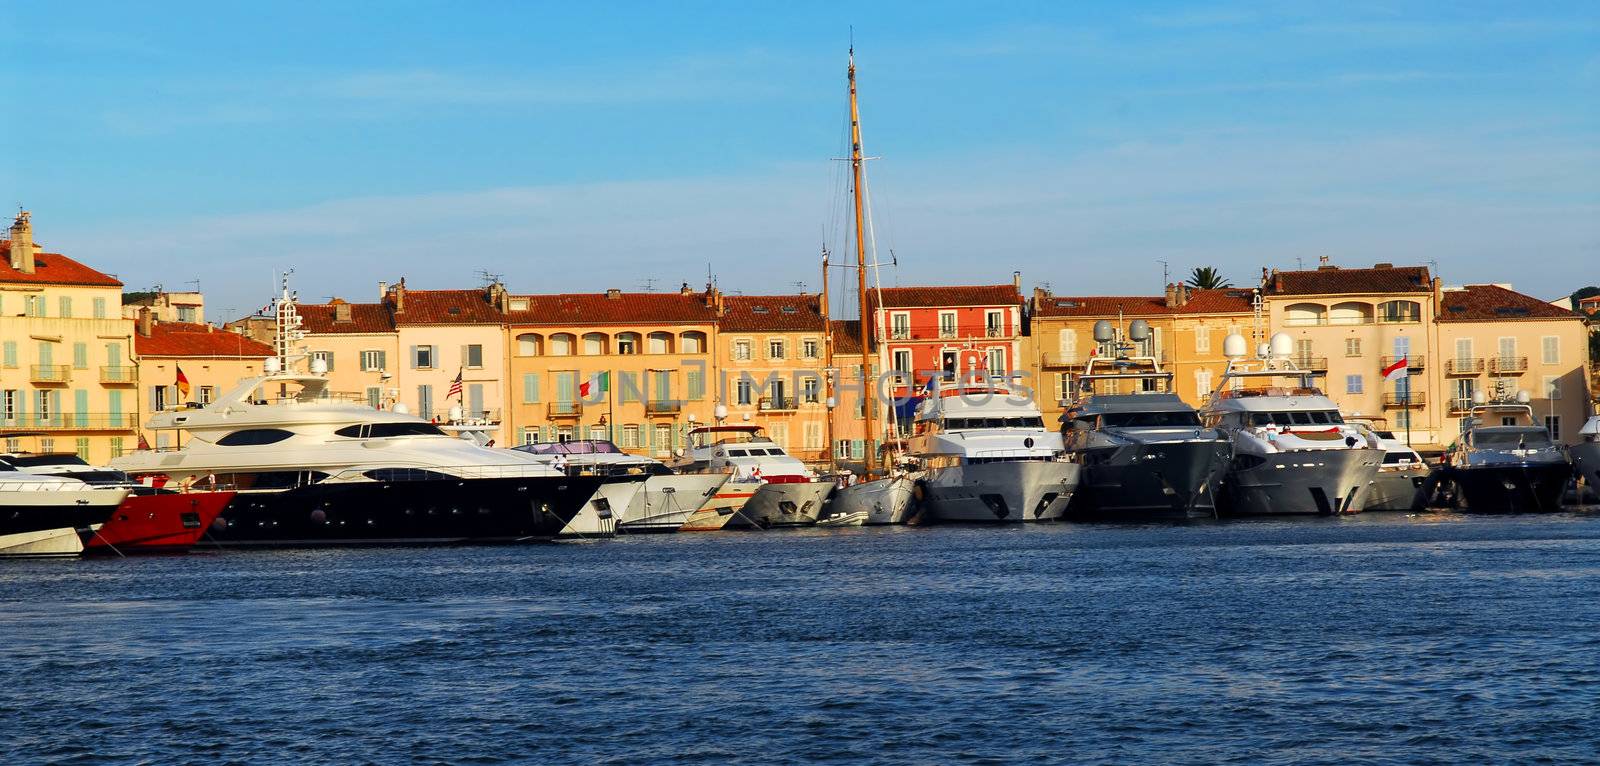 Luxury boats anchored in St. Tropez in French Riviera